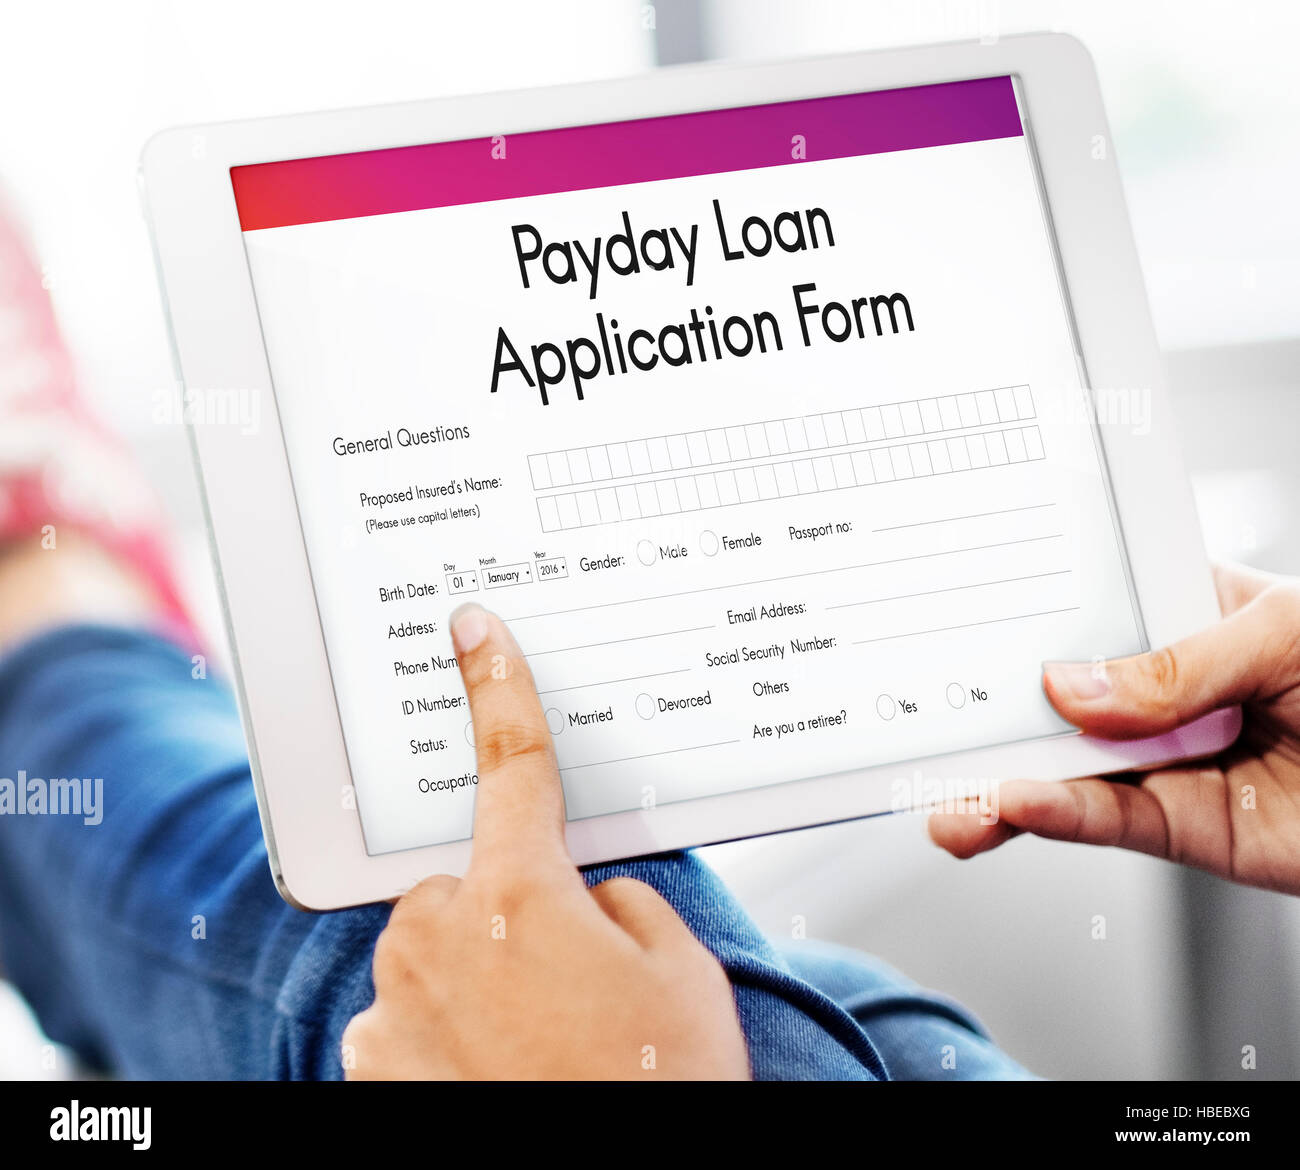 Payday Loan Application Form Concept Foto Stock